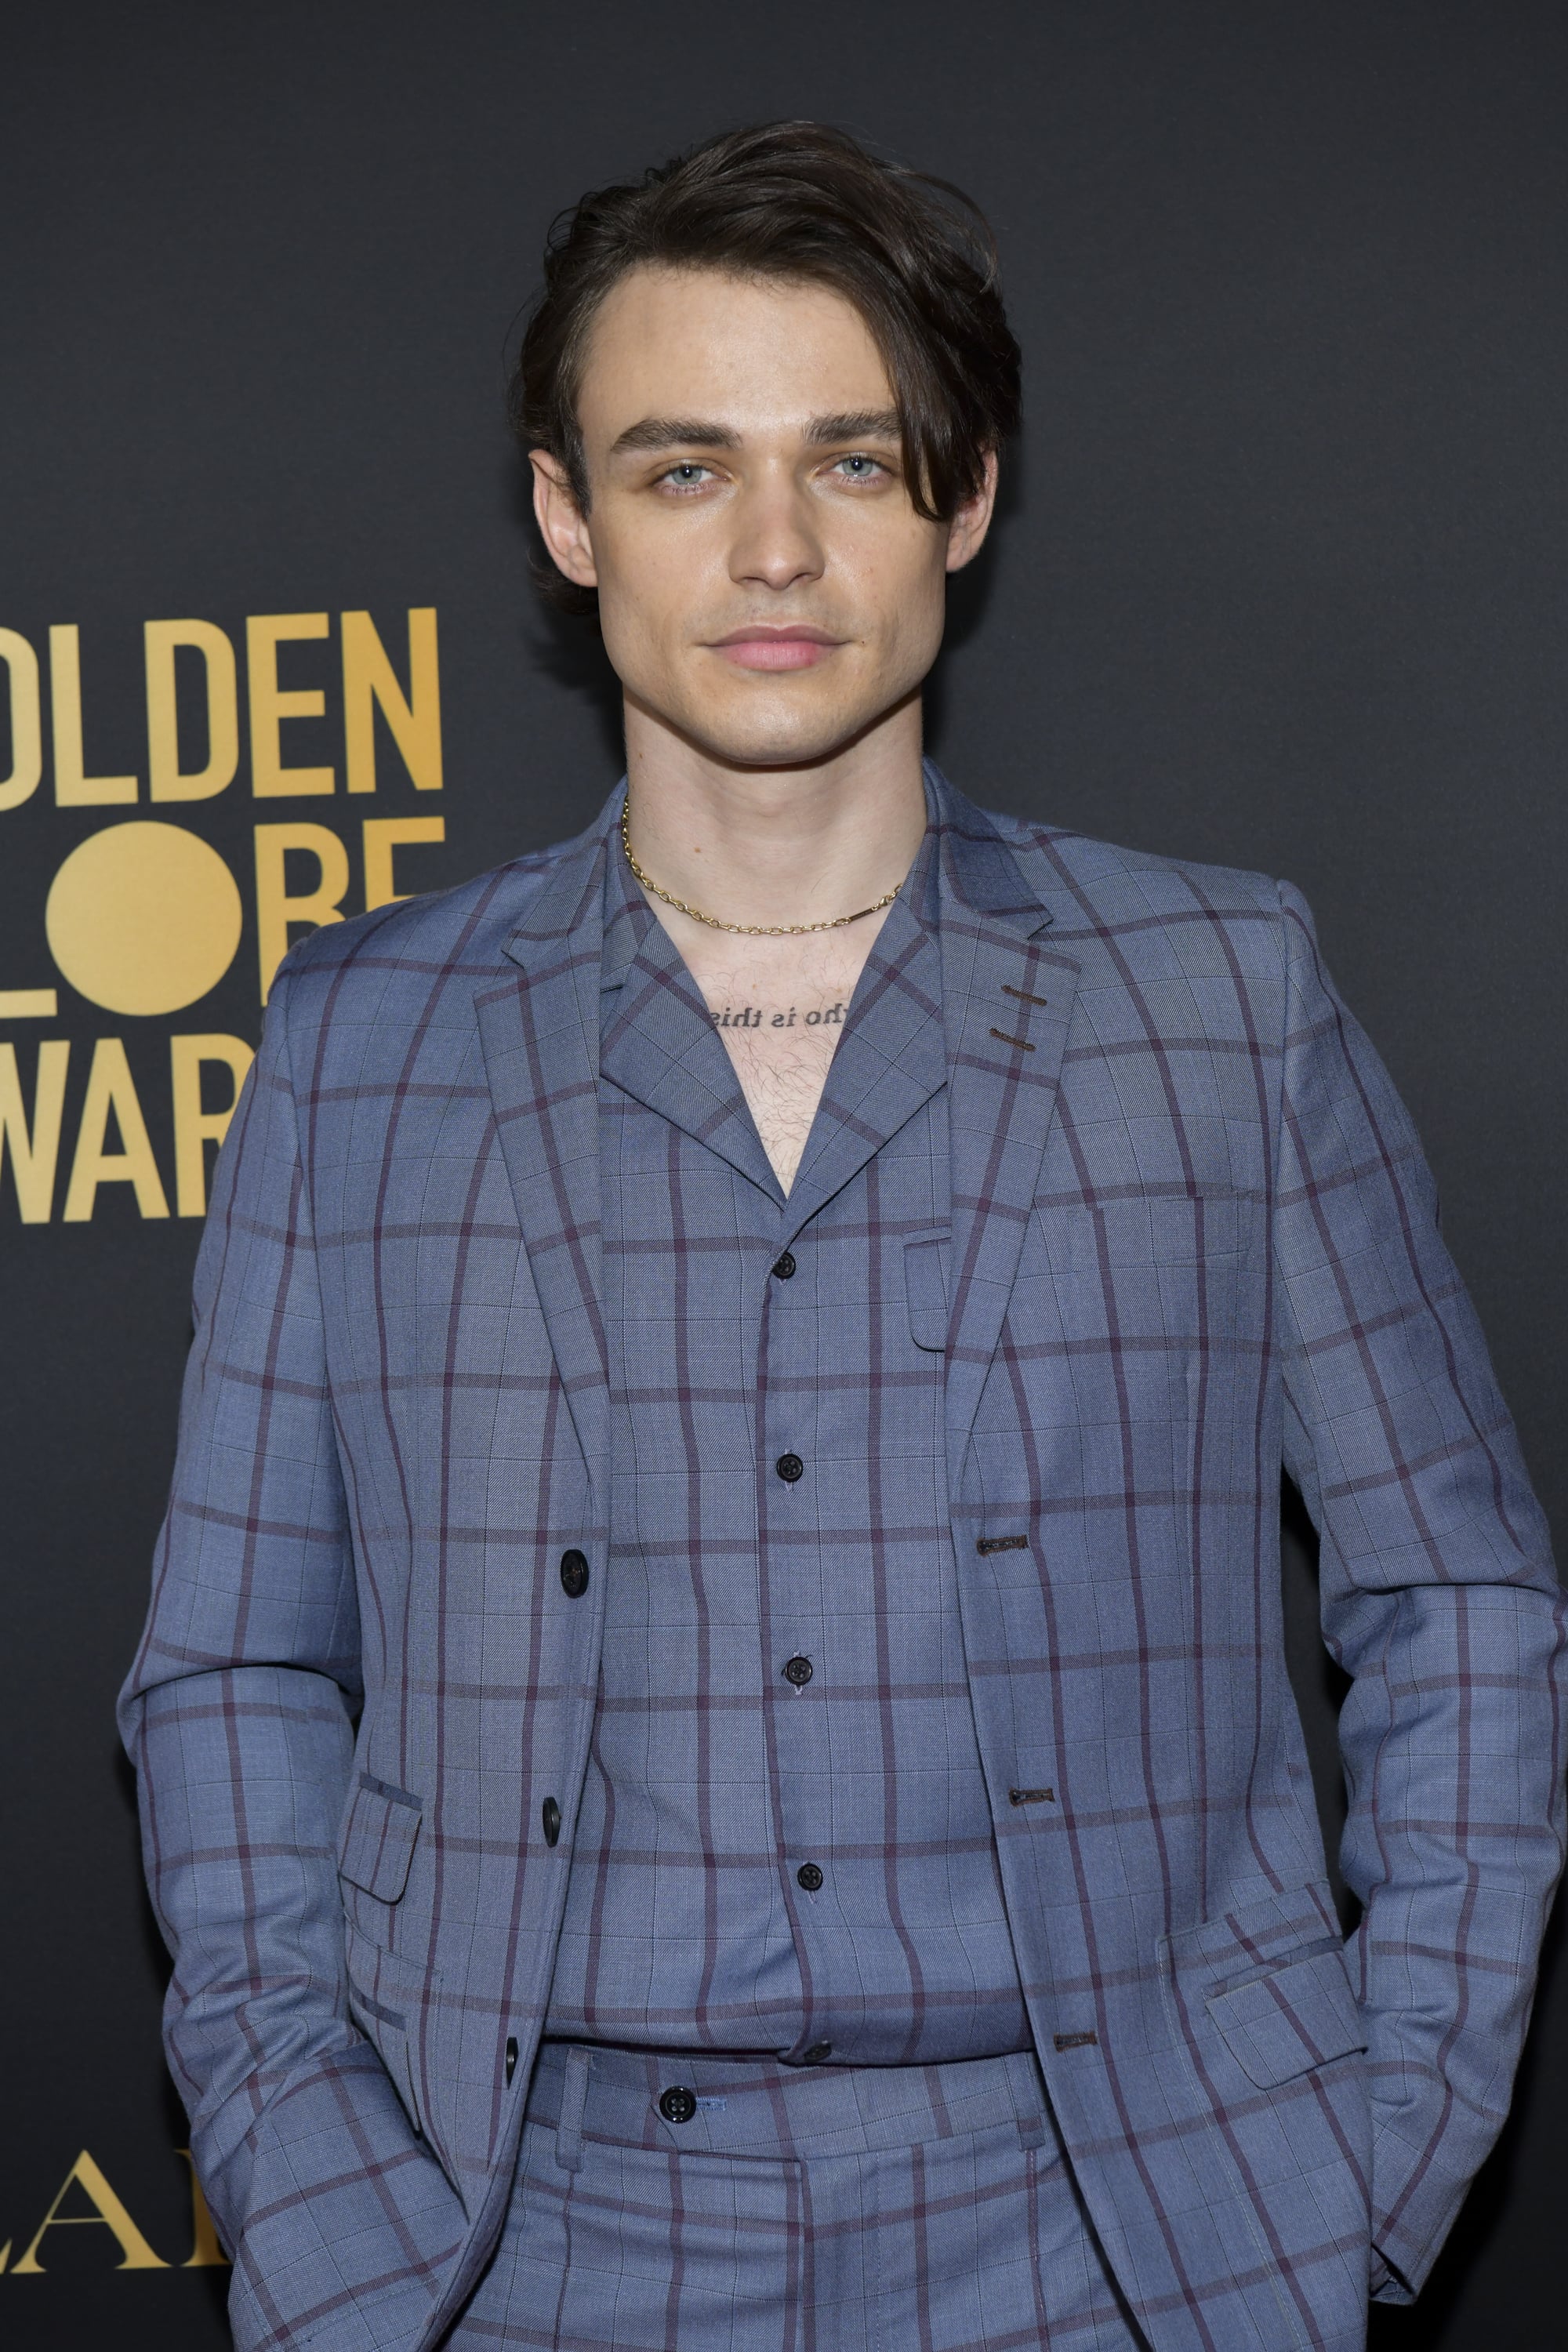 WEST HOLLYWOOD, CALIFORNIA - NOVEMBER 14: Thomas Doherty attends the HFPA and THR Golden Globe Ambassador Party at Catch LA on November 14, 2019 in West Hollywood, California. (Photo by Rodin Eckenroth/Getty Images)